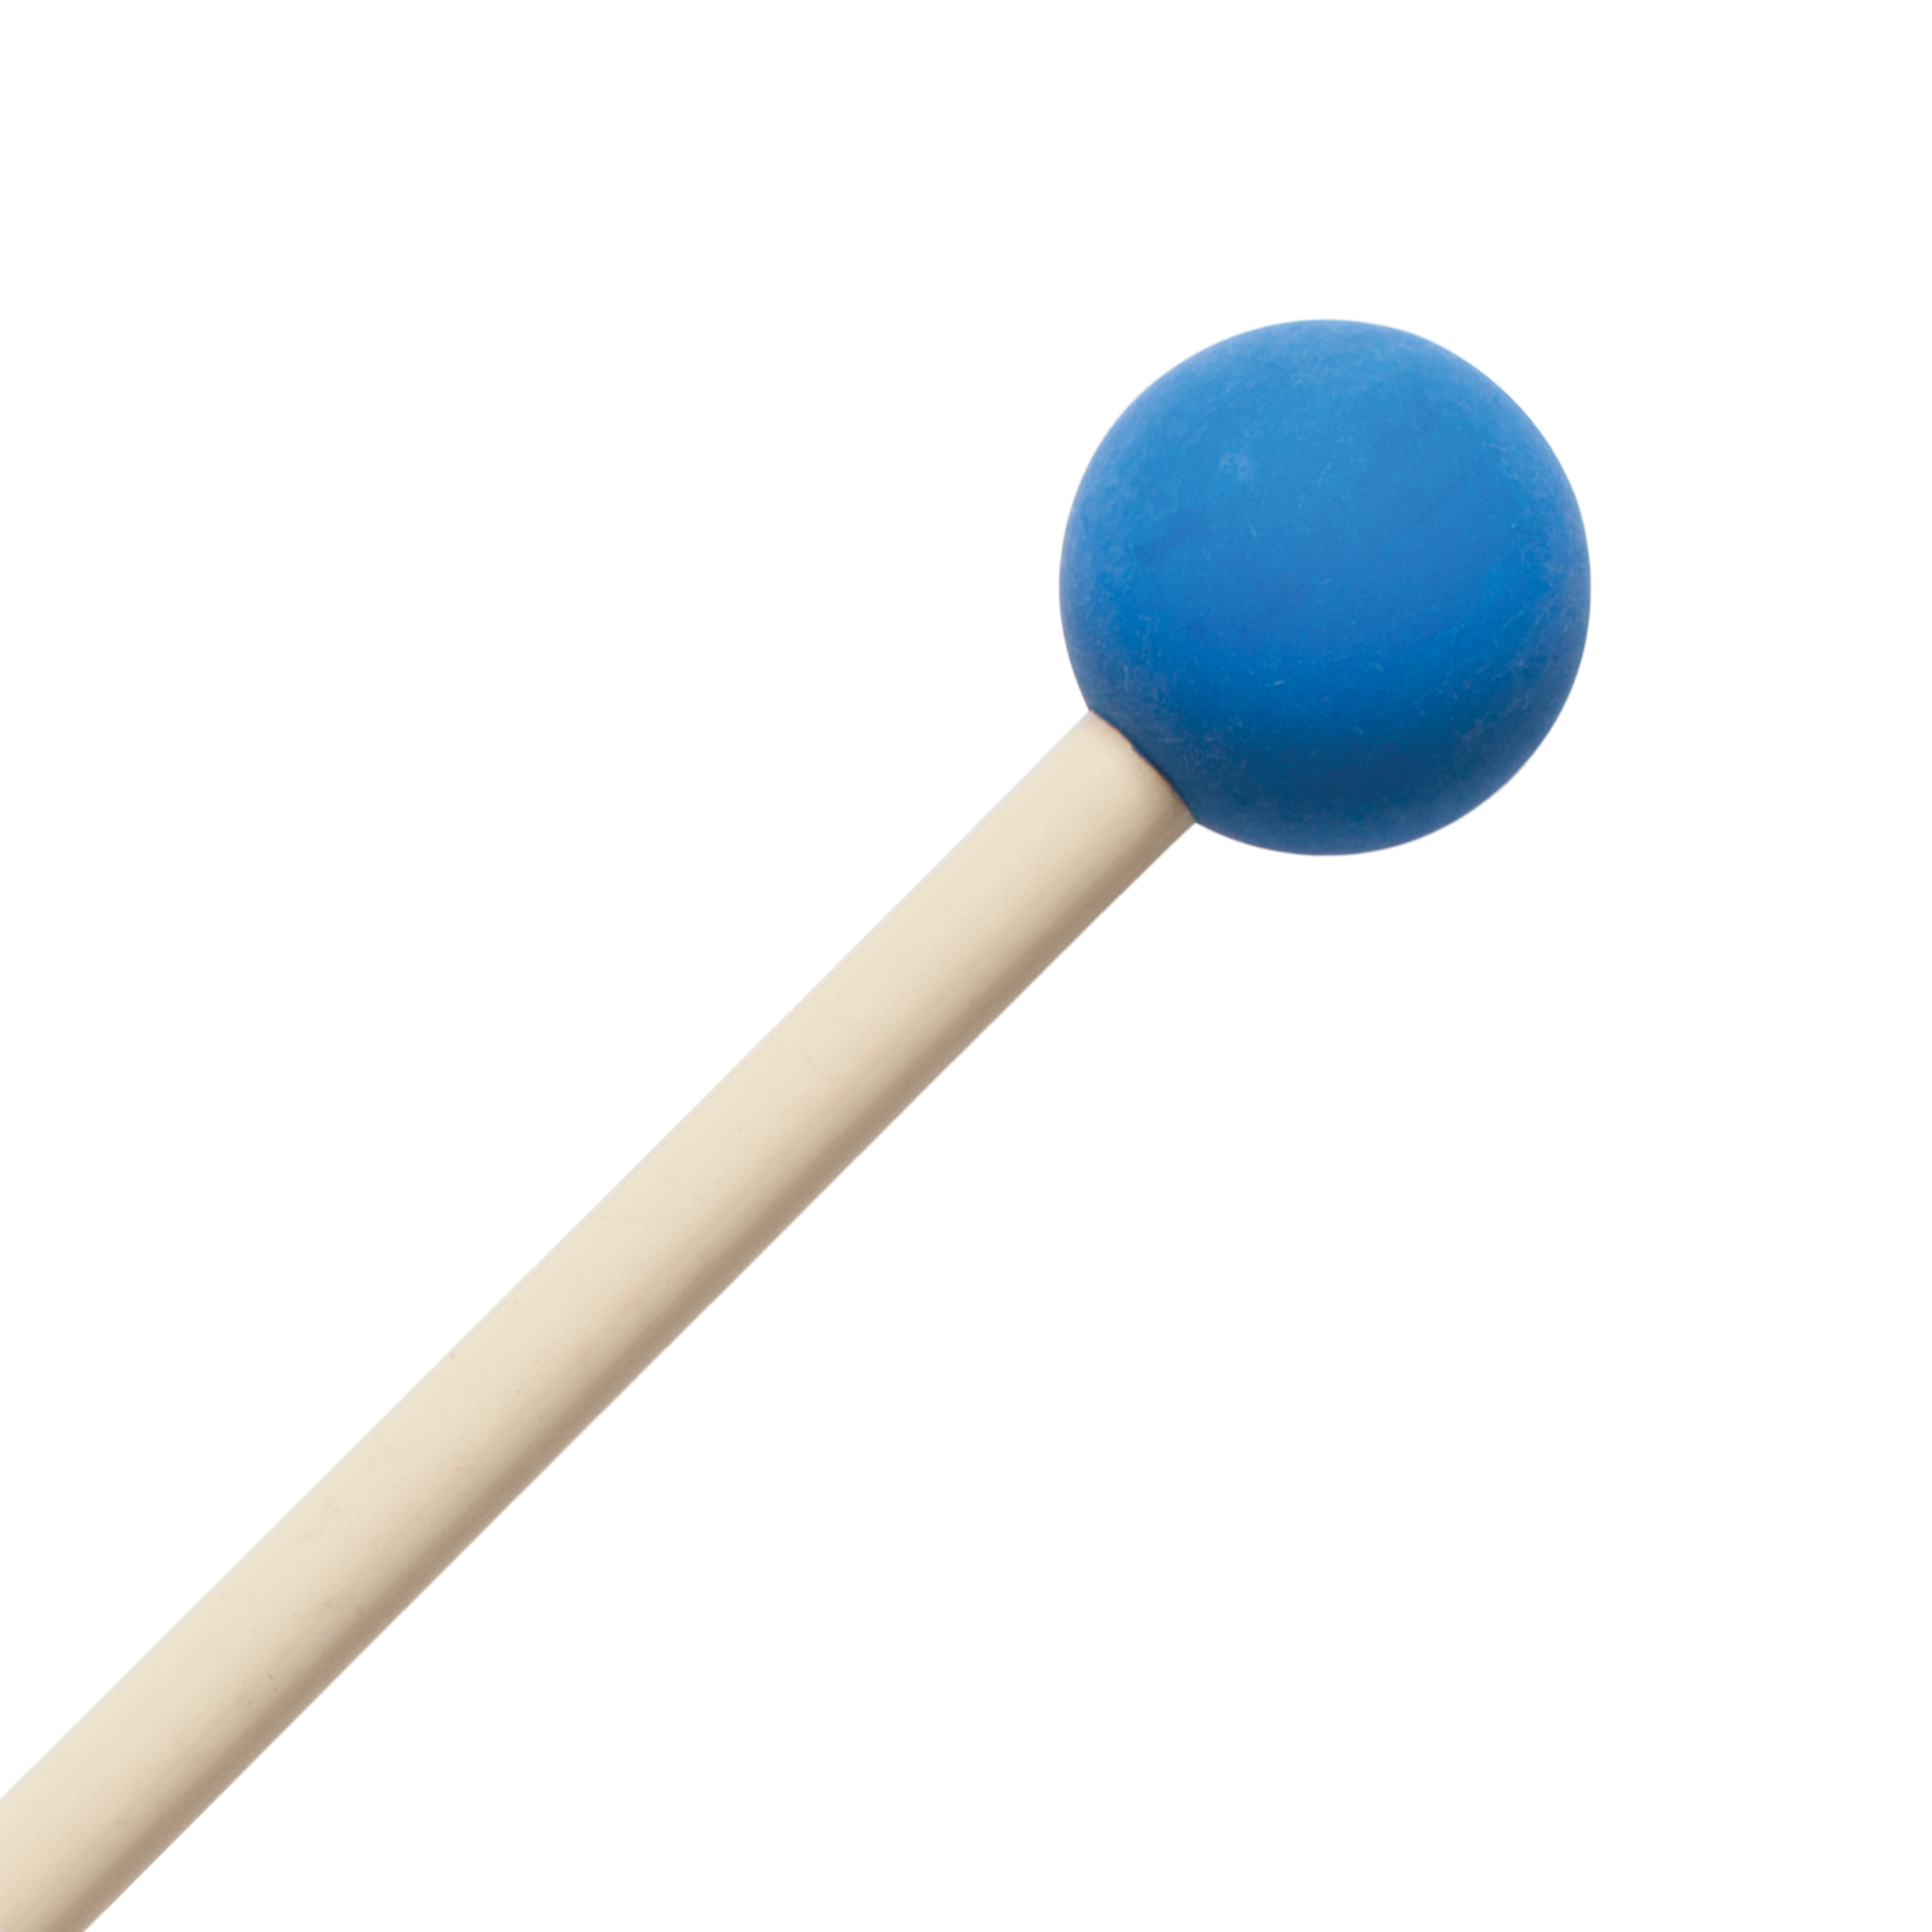 Educational Keyboard Mallets - Overview - Mallets - Percussion